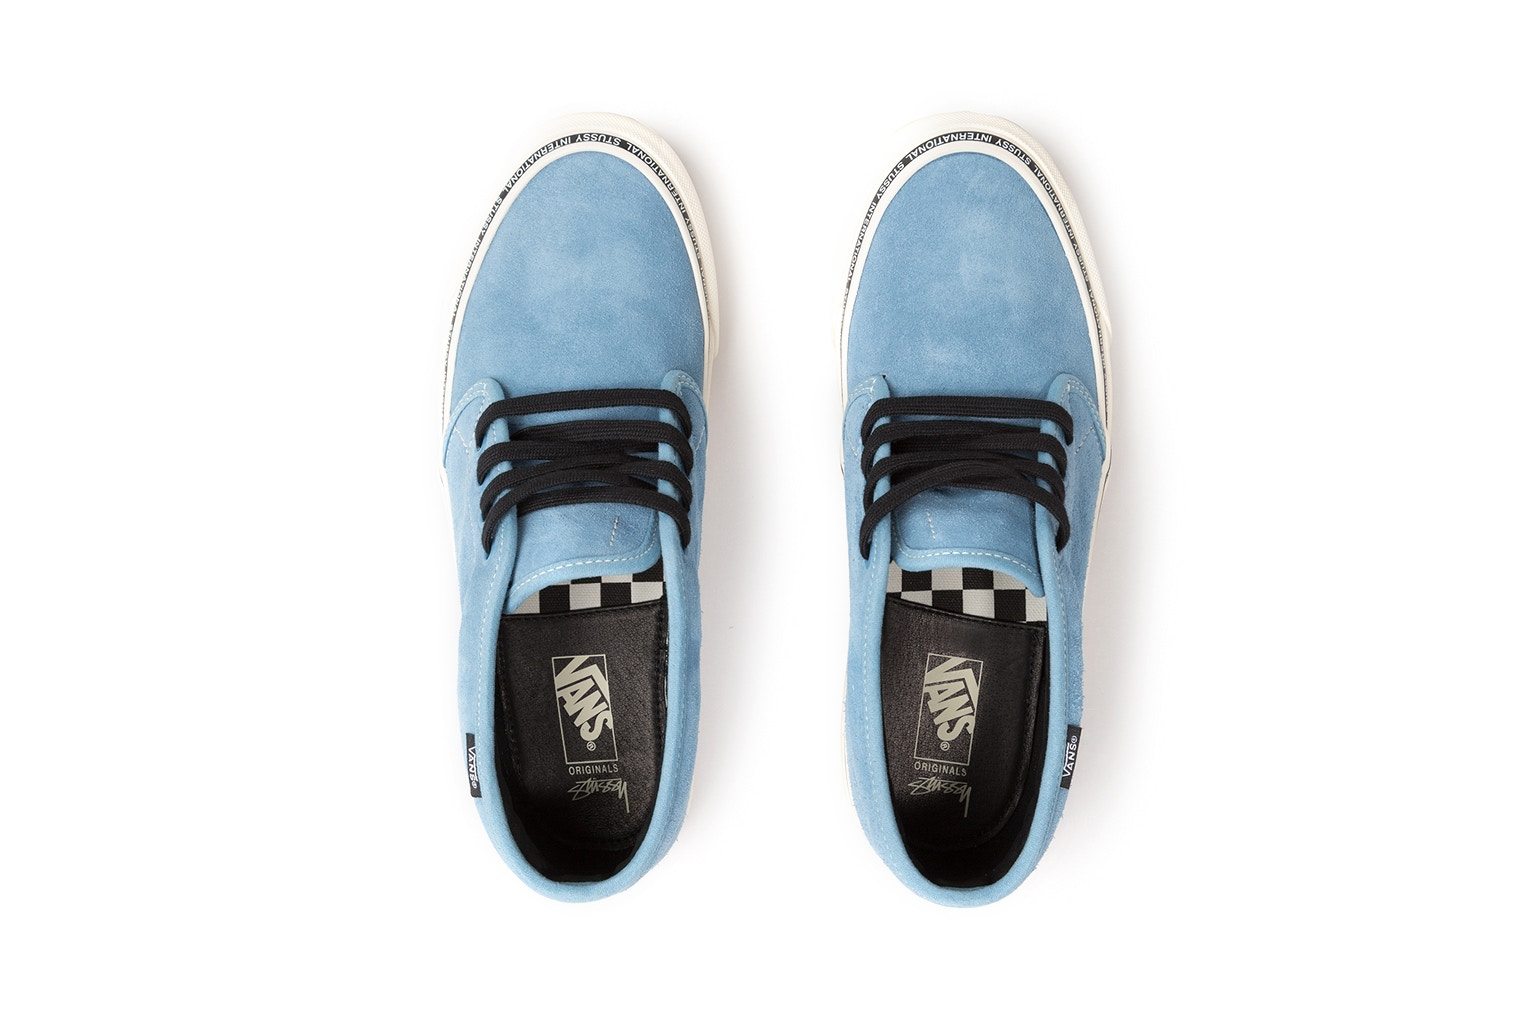 Vans Vault Joins the Stüssy Tribe for Their Latest Summer Pairing